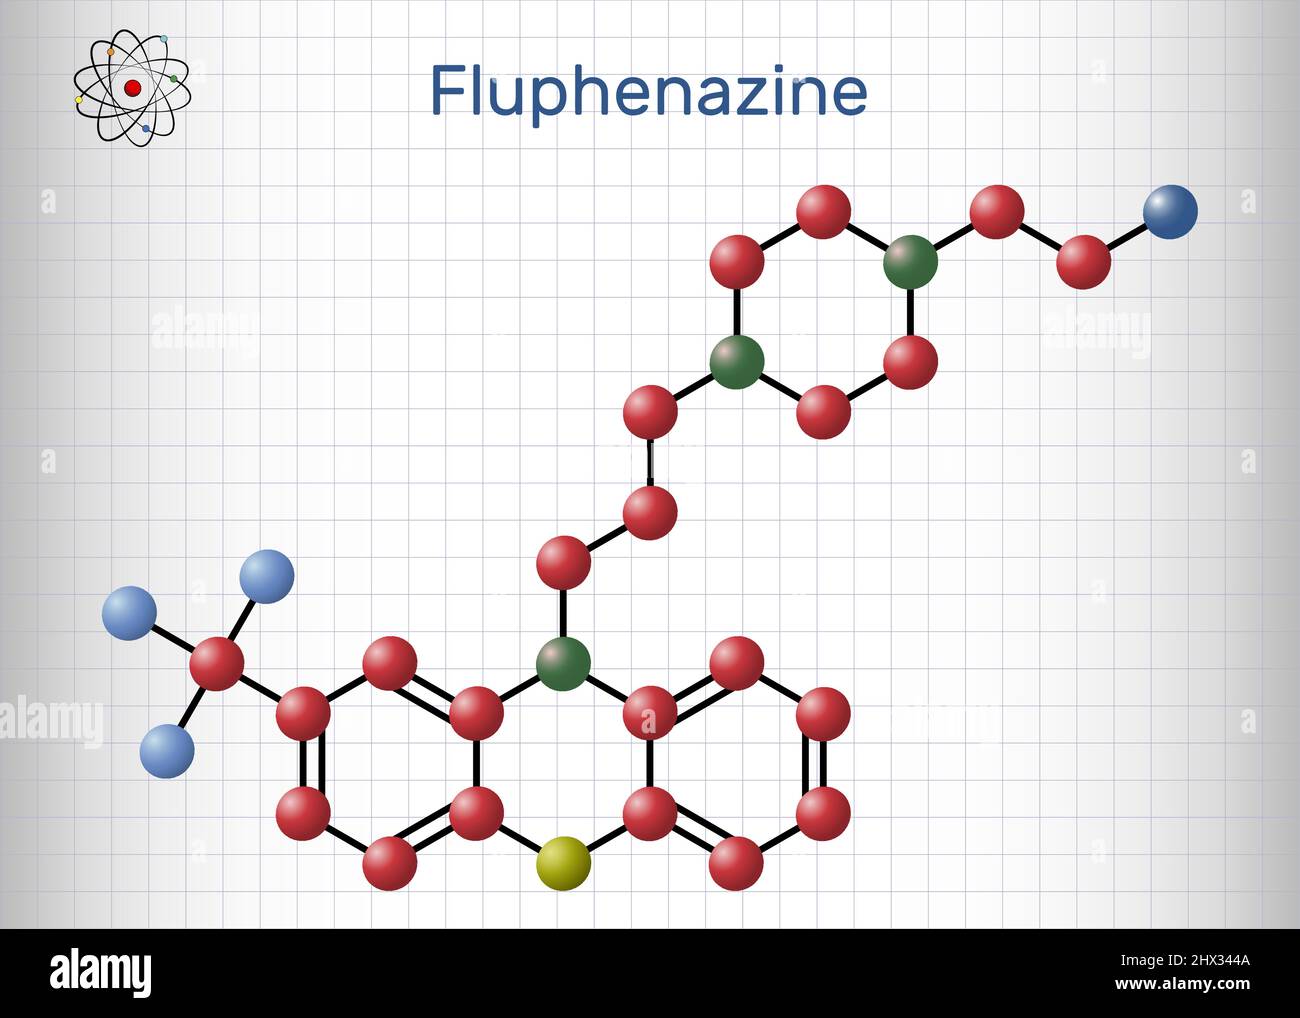 Fluphenazine molecule. It is is a phenothiazine, neuroleptic, antipsychotic medication, used in the treatment of psychoses. Molecule model. Sheet of p Stock Vector